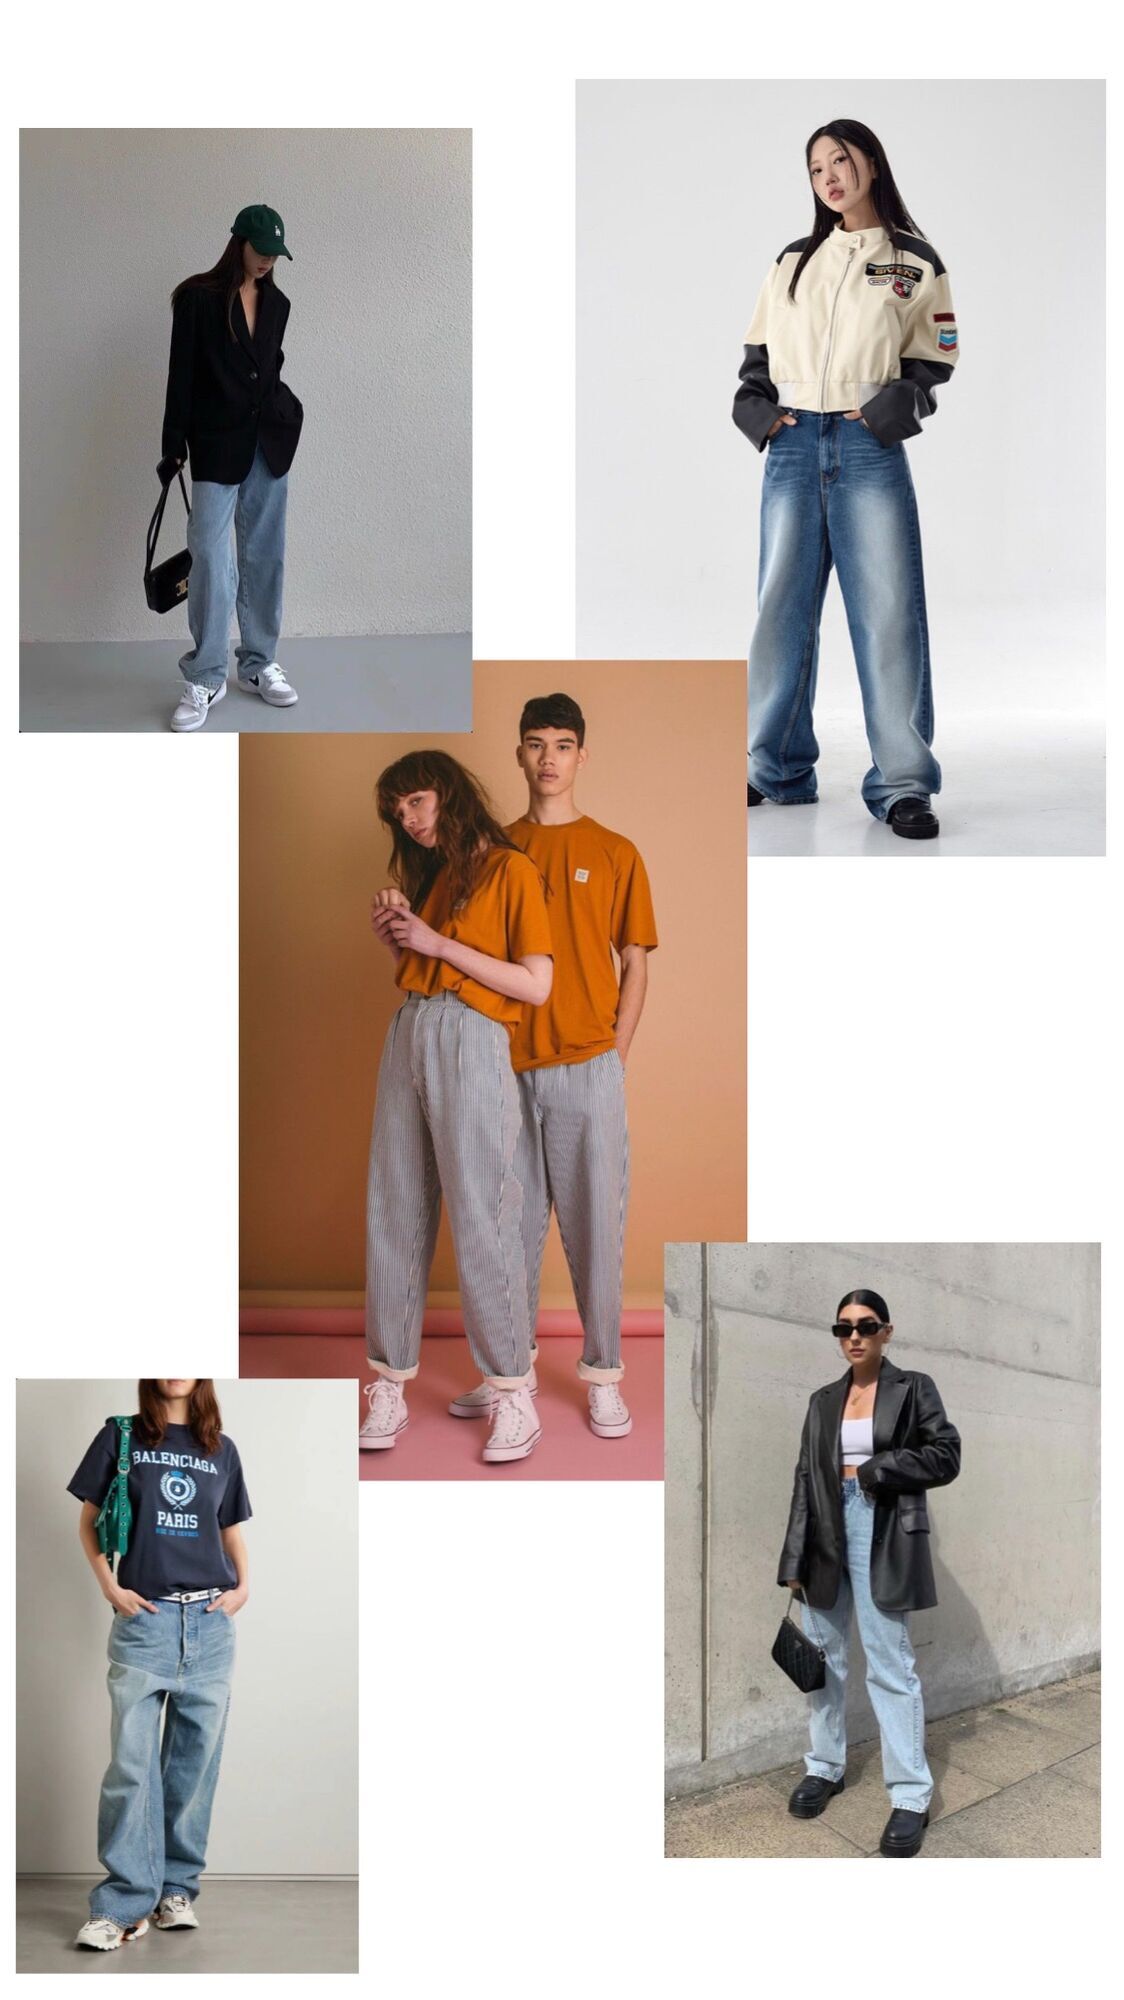 A new trend is gaining popularity: what is the secret of unisex style